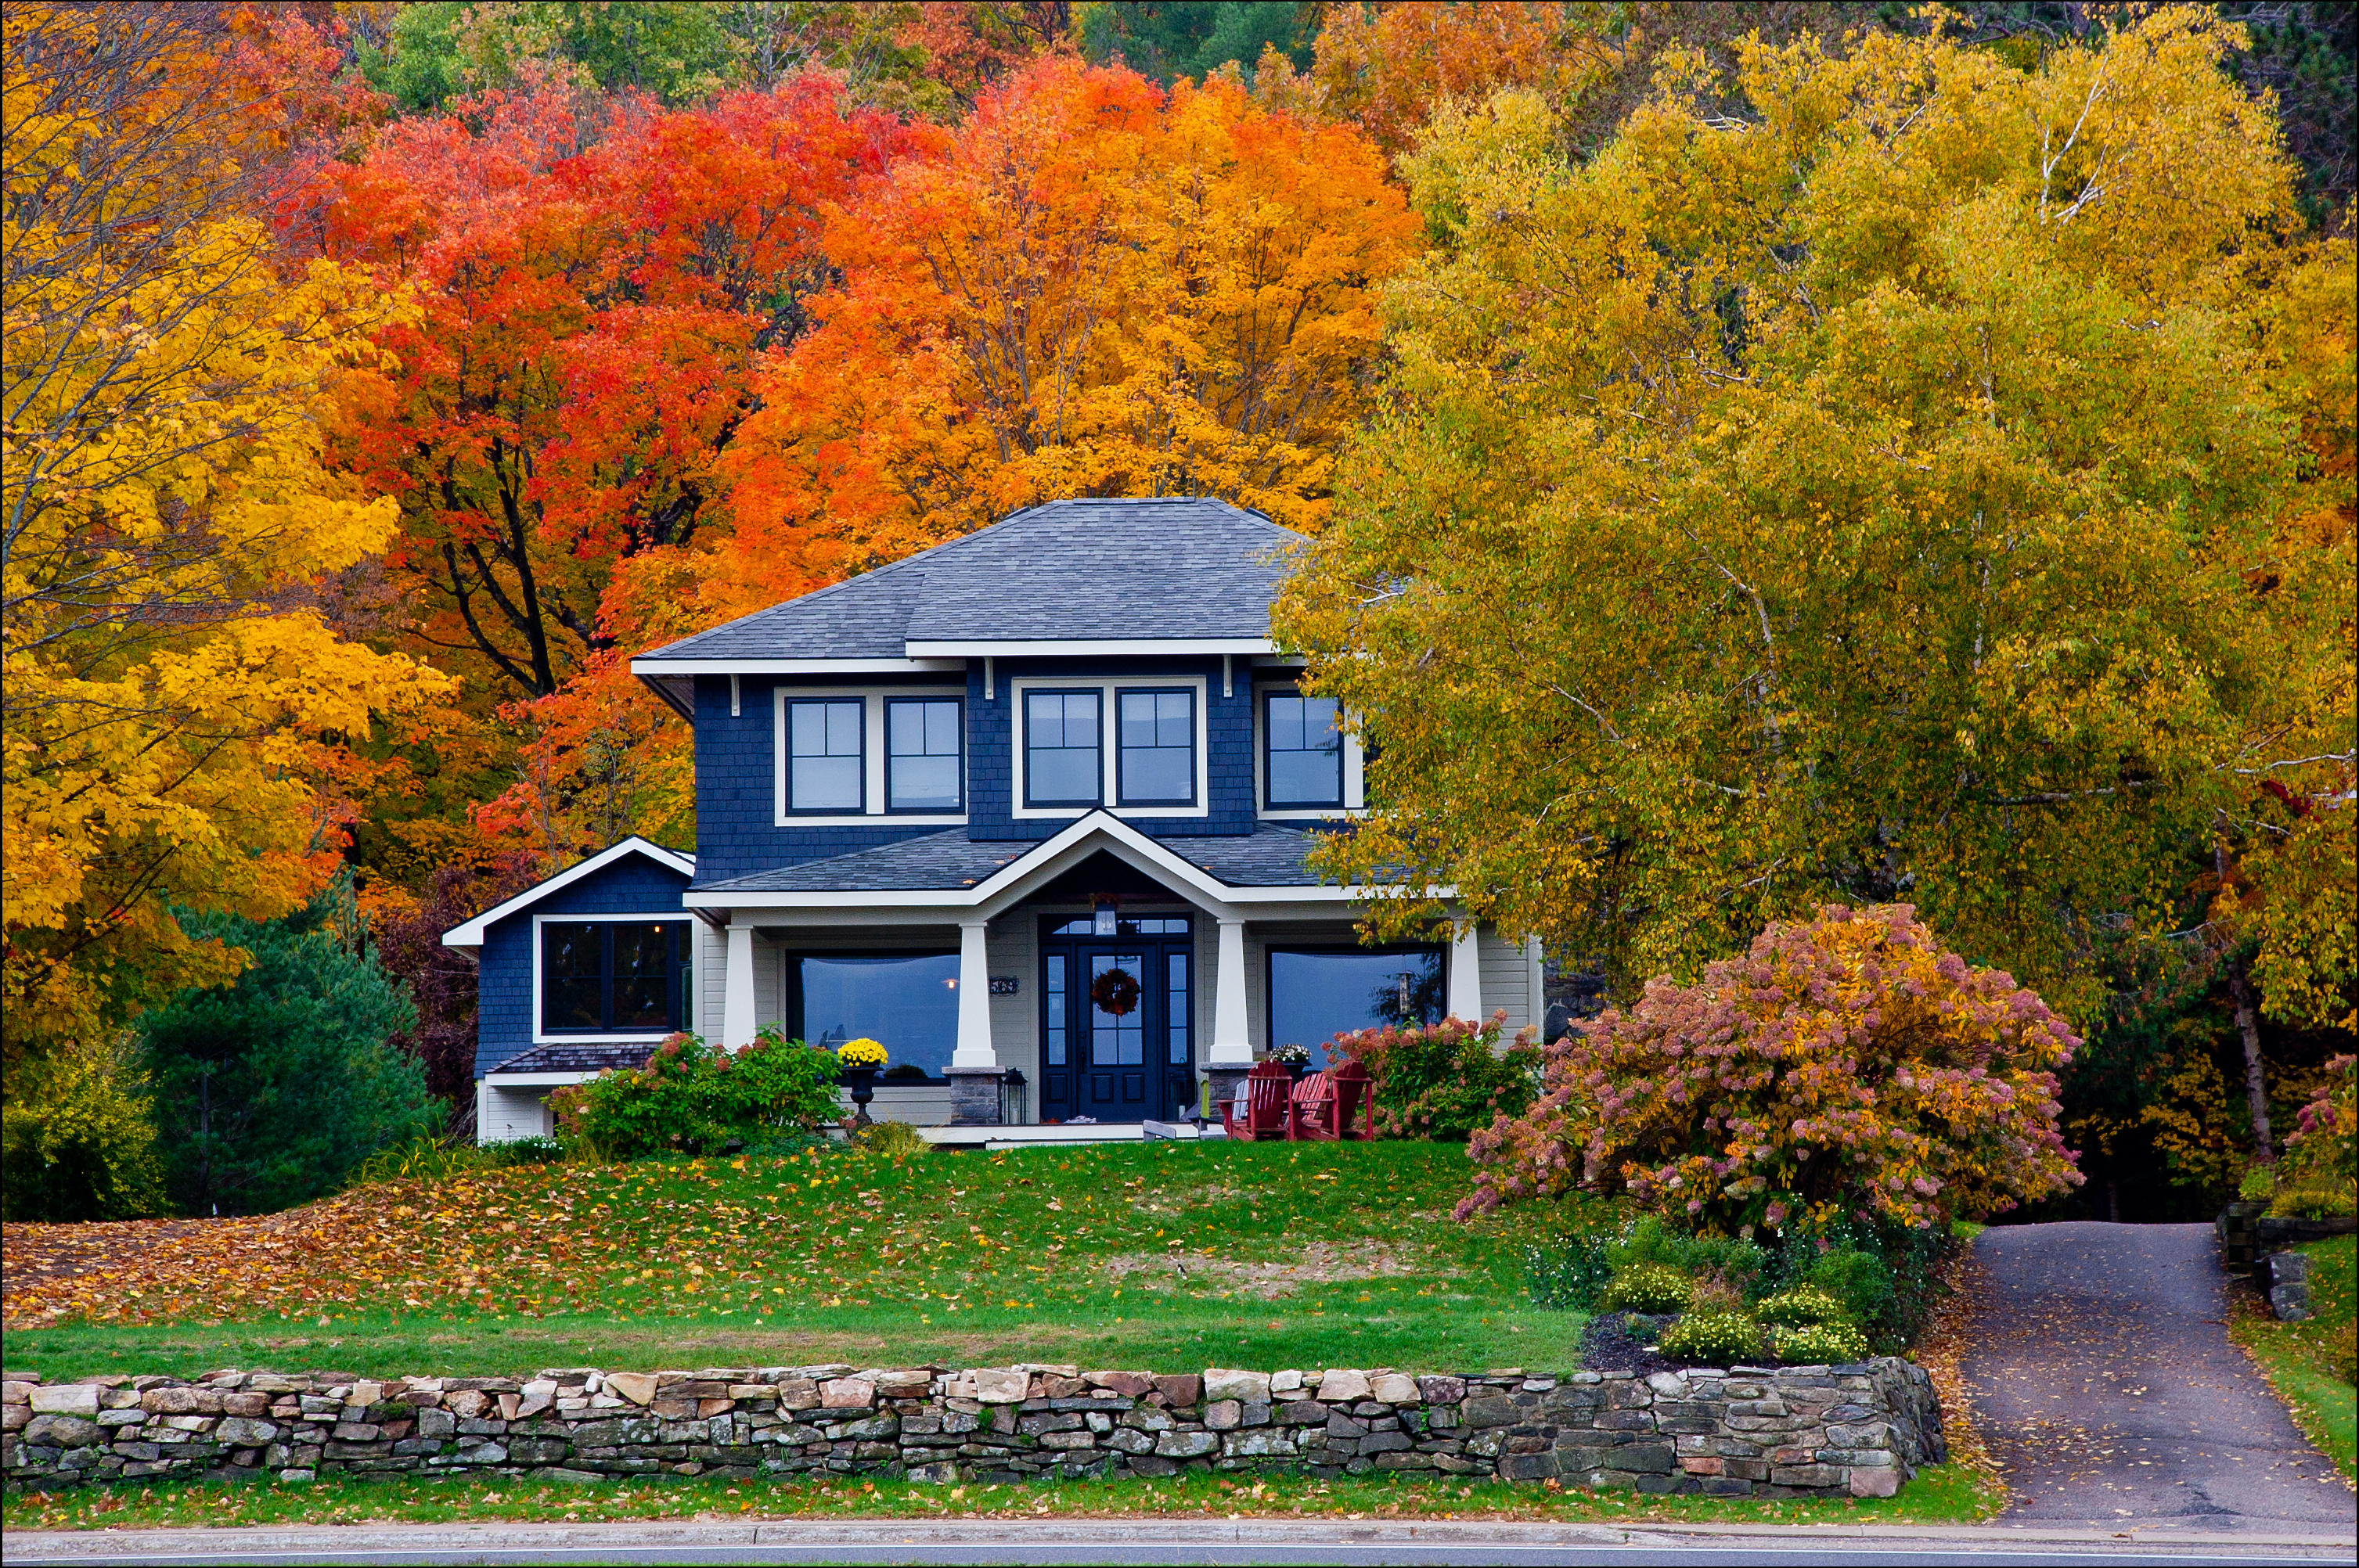 Image of 2-Story Home Surrounded by Trees Showing Fall Colors